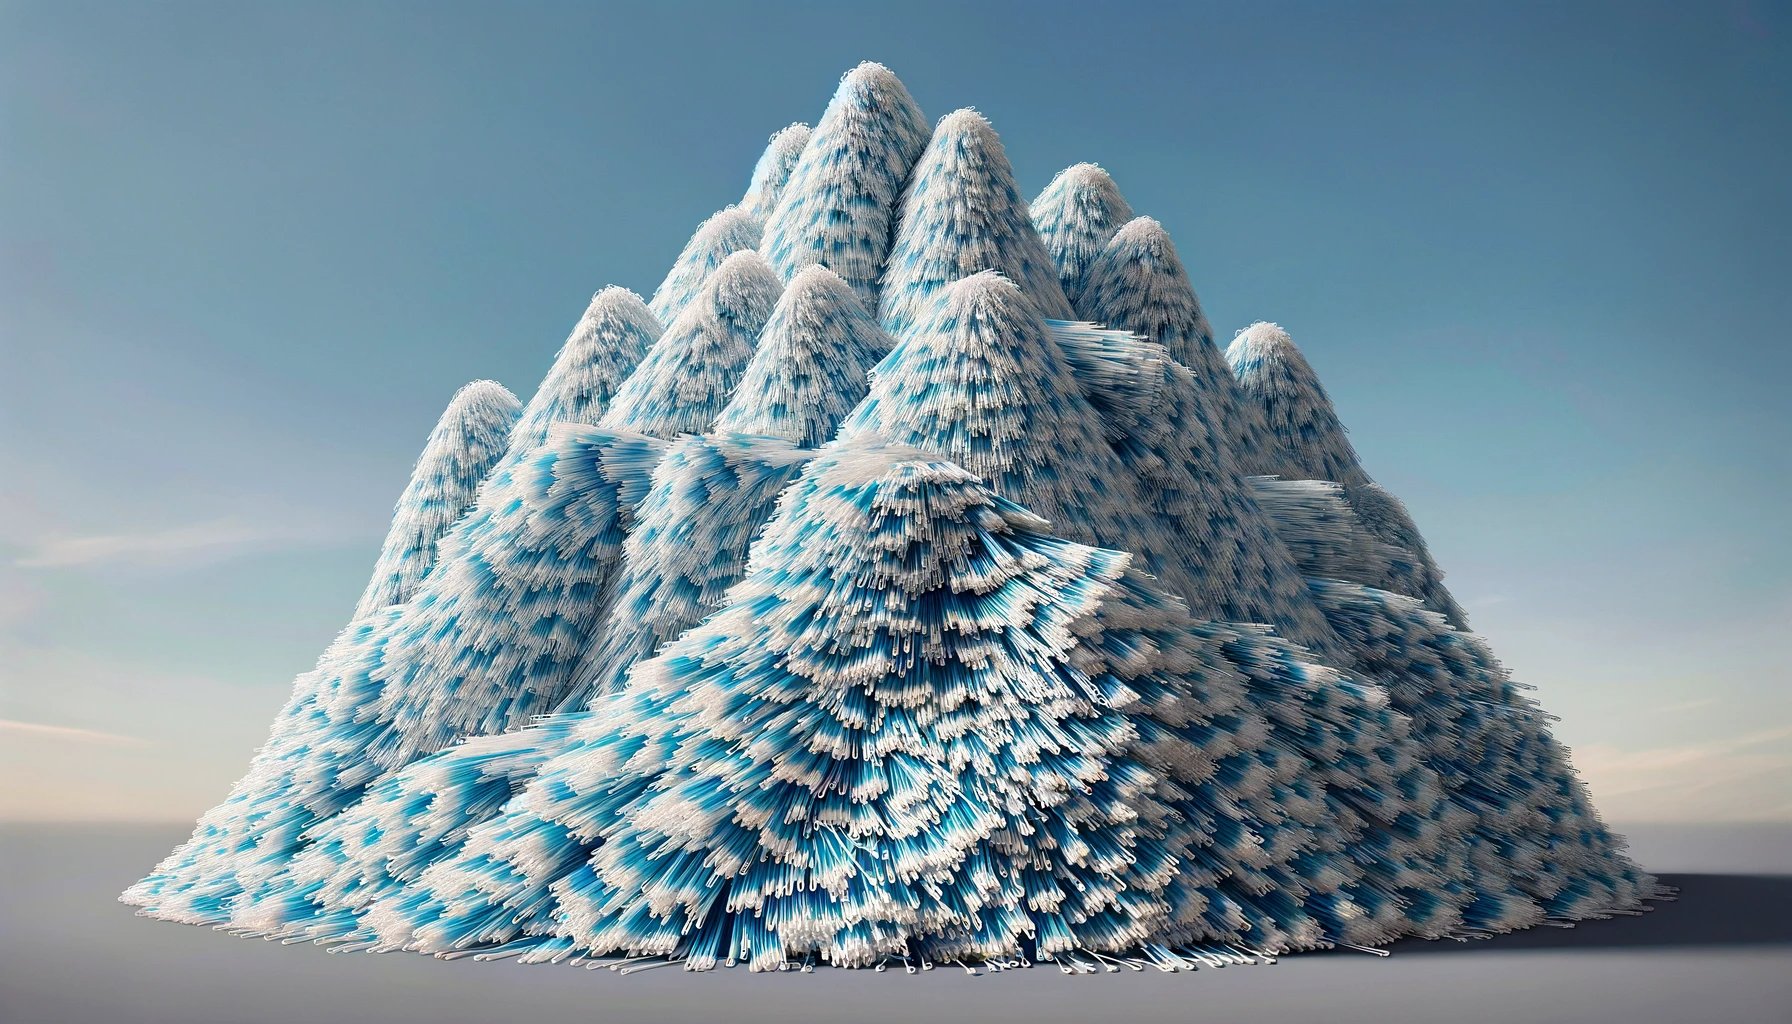 A large mountain composed entirely of dental floss picks similar to the one shown in the uploaded image. The mountain is made up of numerous floss pic